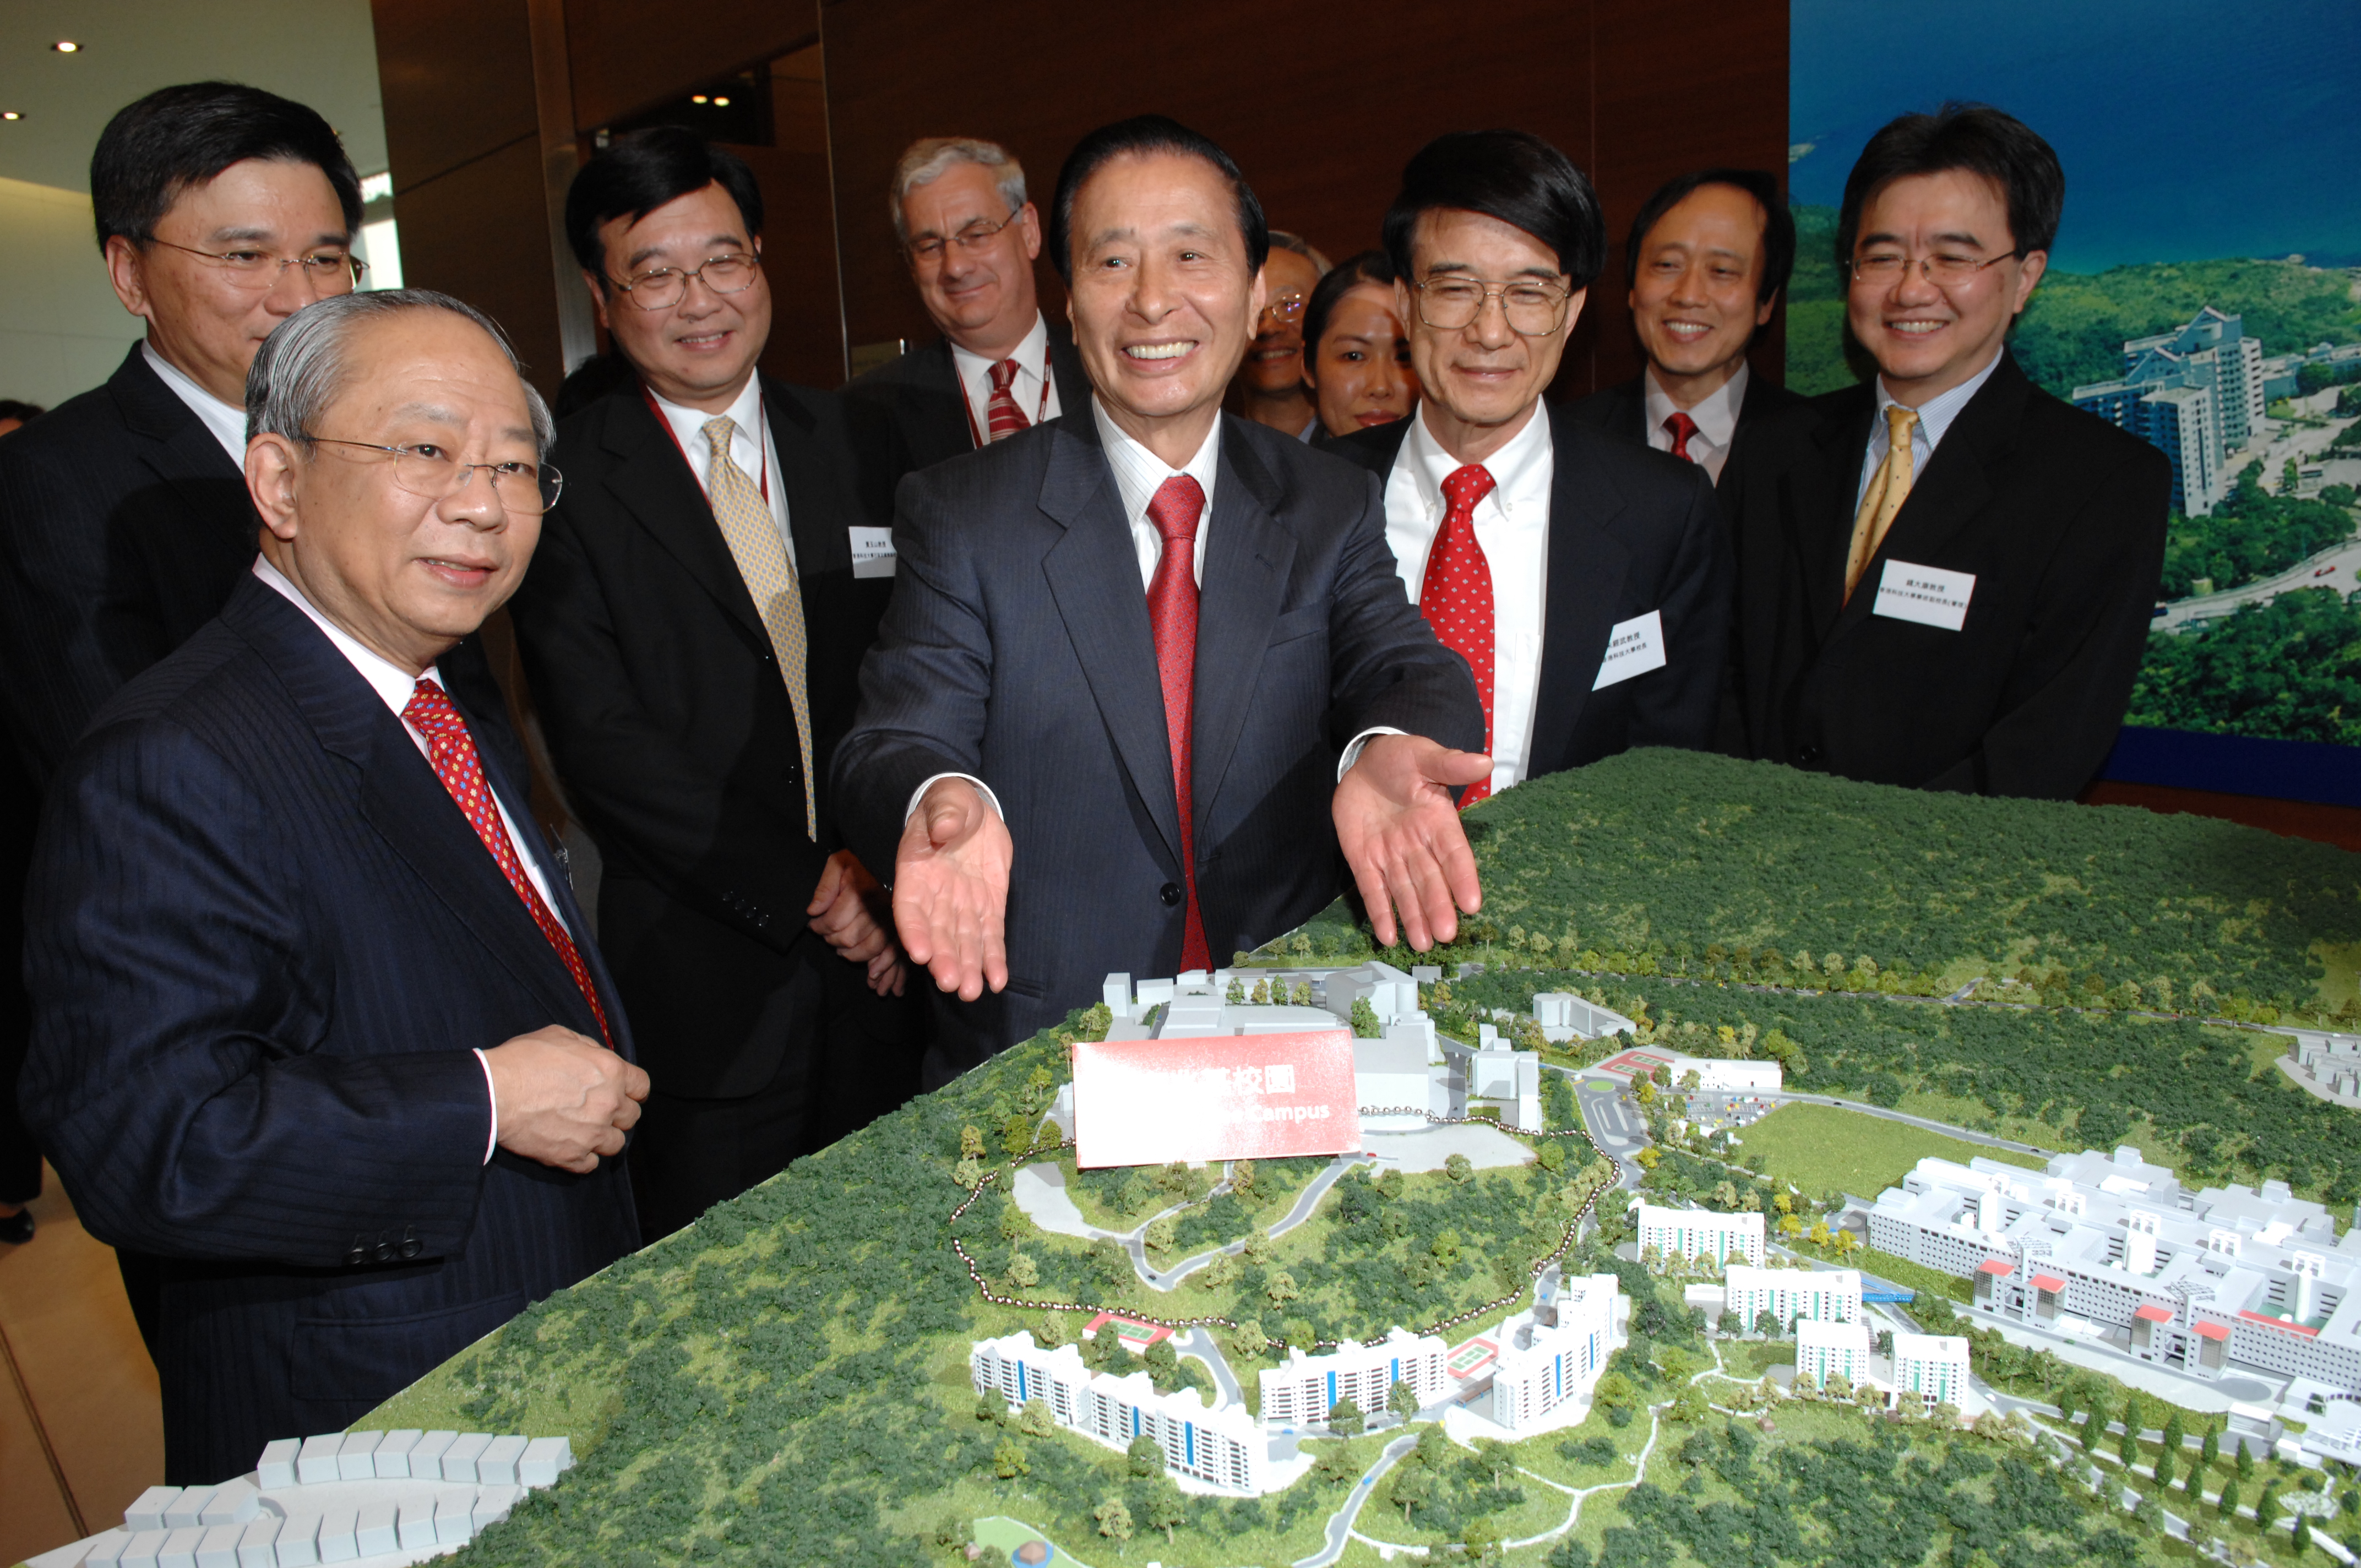 $400M Donation to Support HKUST's Drive Towards World Class Excellence |  The Hong Kong University of Science and Technology